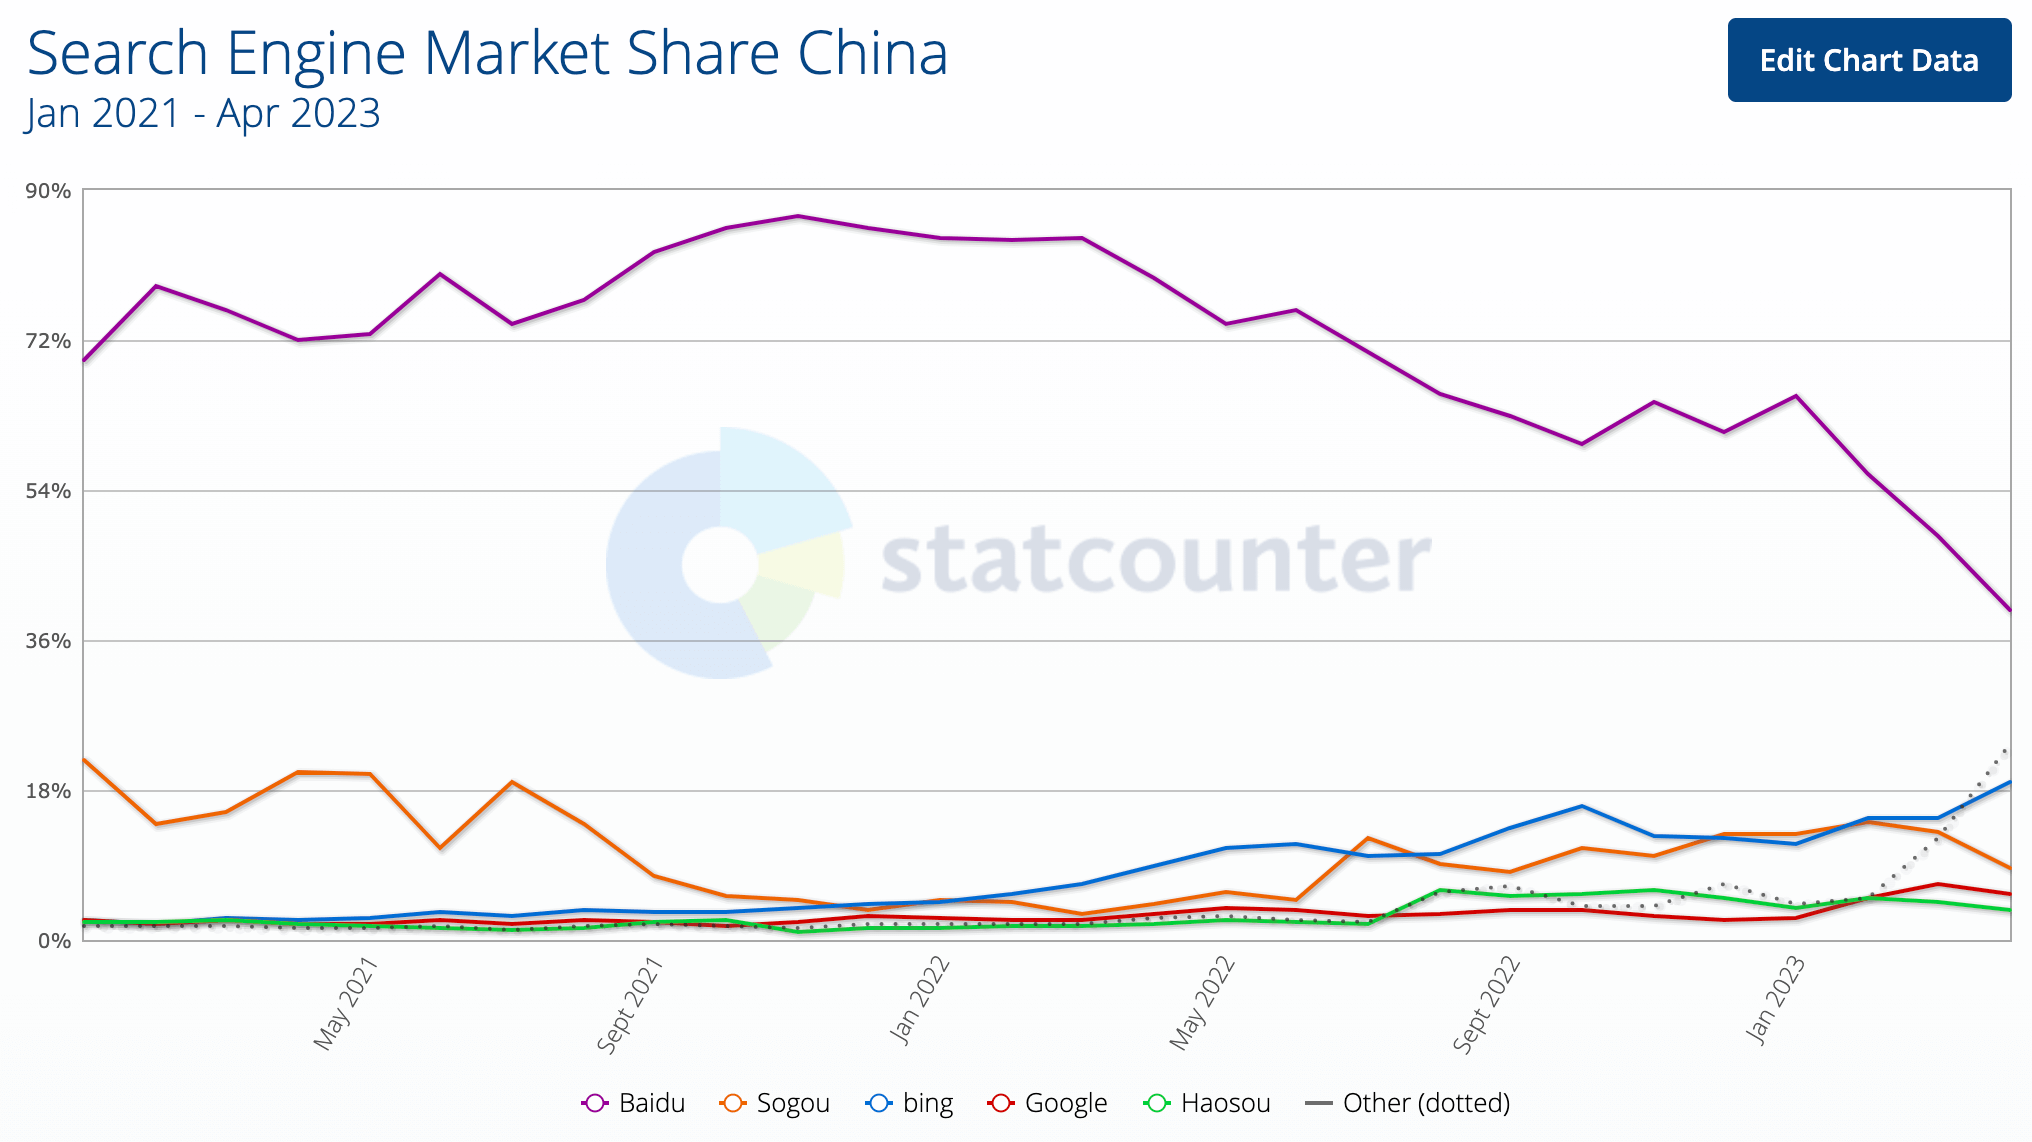 GS-Statcounter's Search Engine Market Share China (Desktop & Mobile combined) - Baidu losing, Bing winning + "Other" winning as well